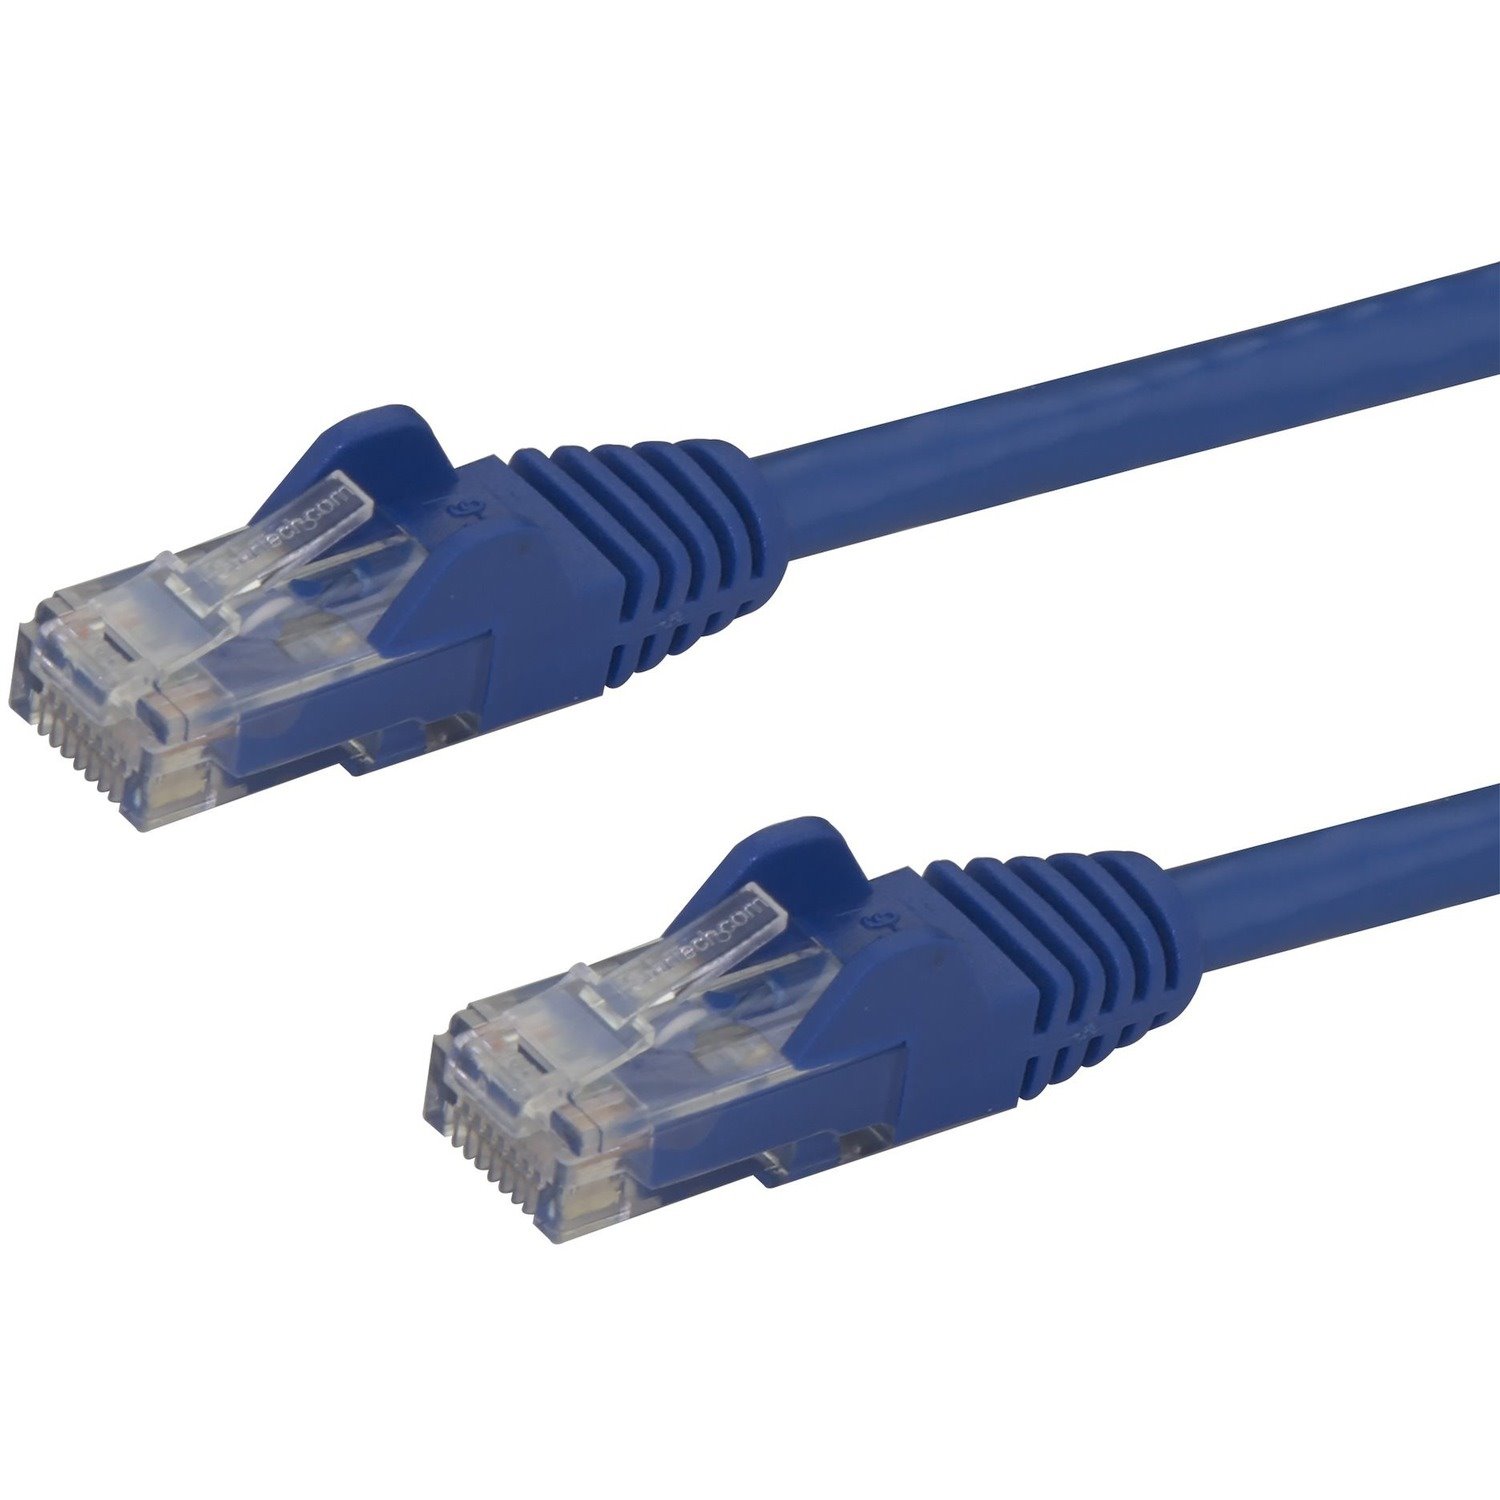 StarTech.com 50 cm Category 6 Network Cable for Network Device - 1